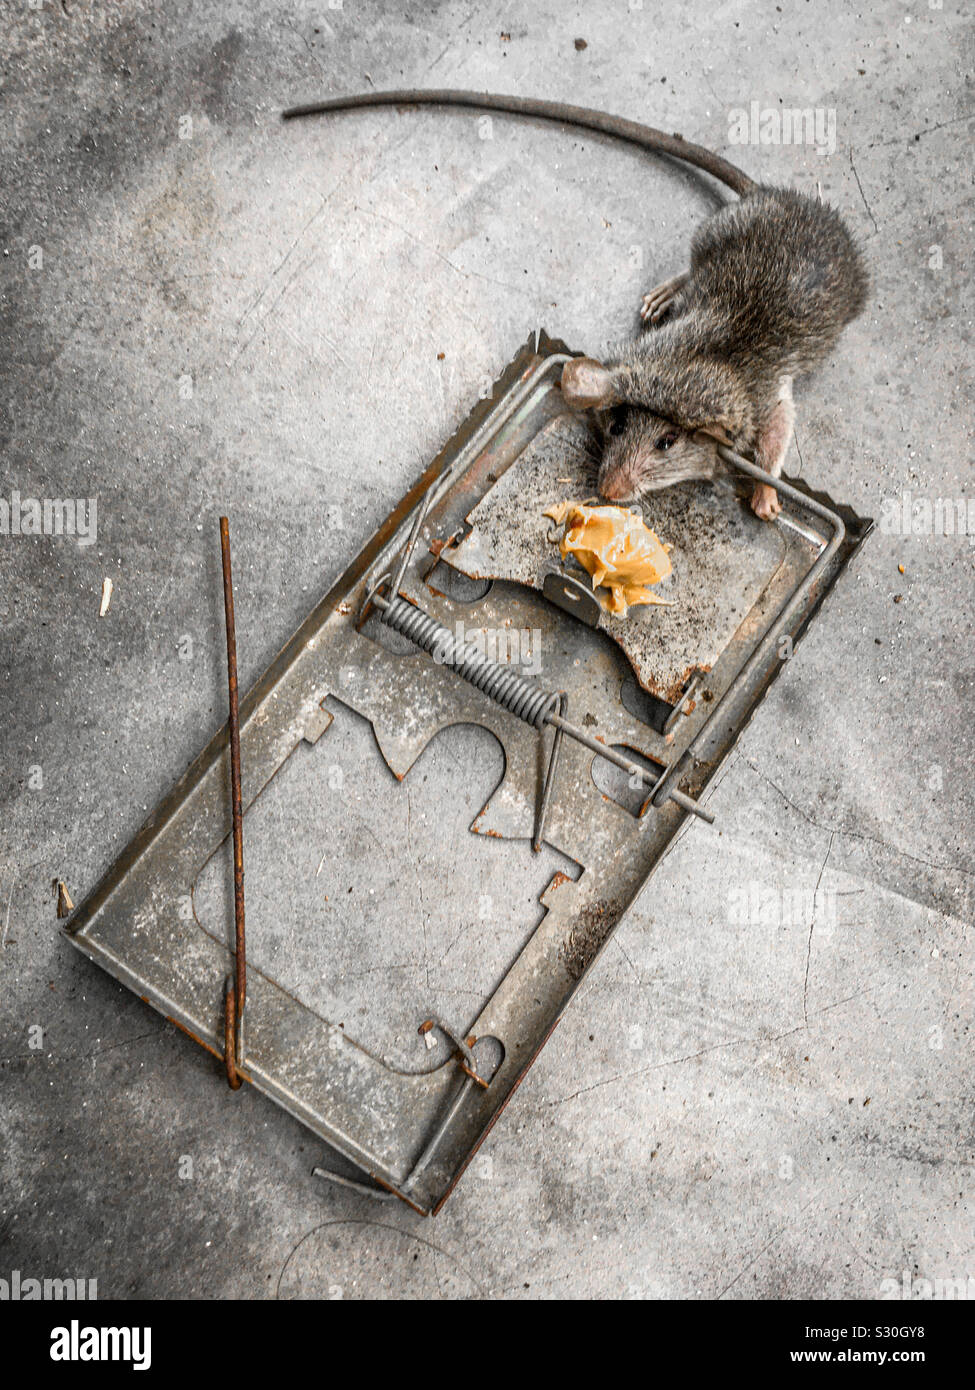 Dead rat in metal spring trap baited with peanut butter on concrete floor. No branding. Stock Photo